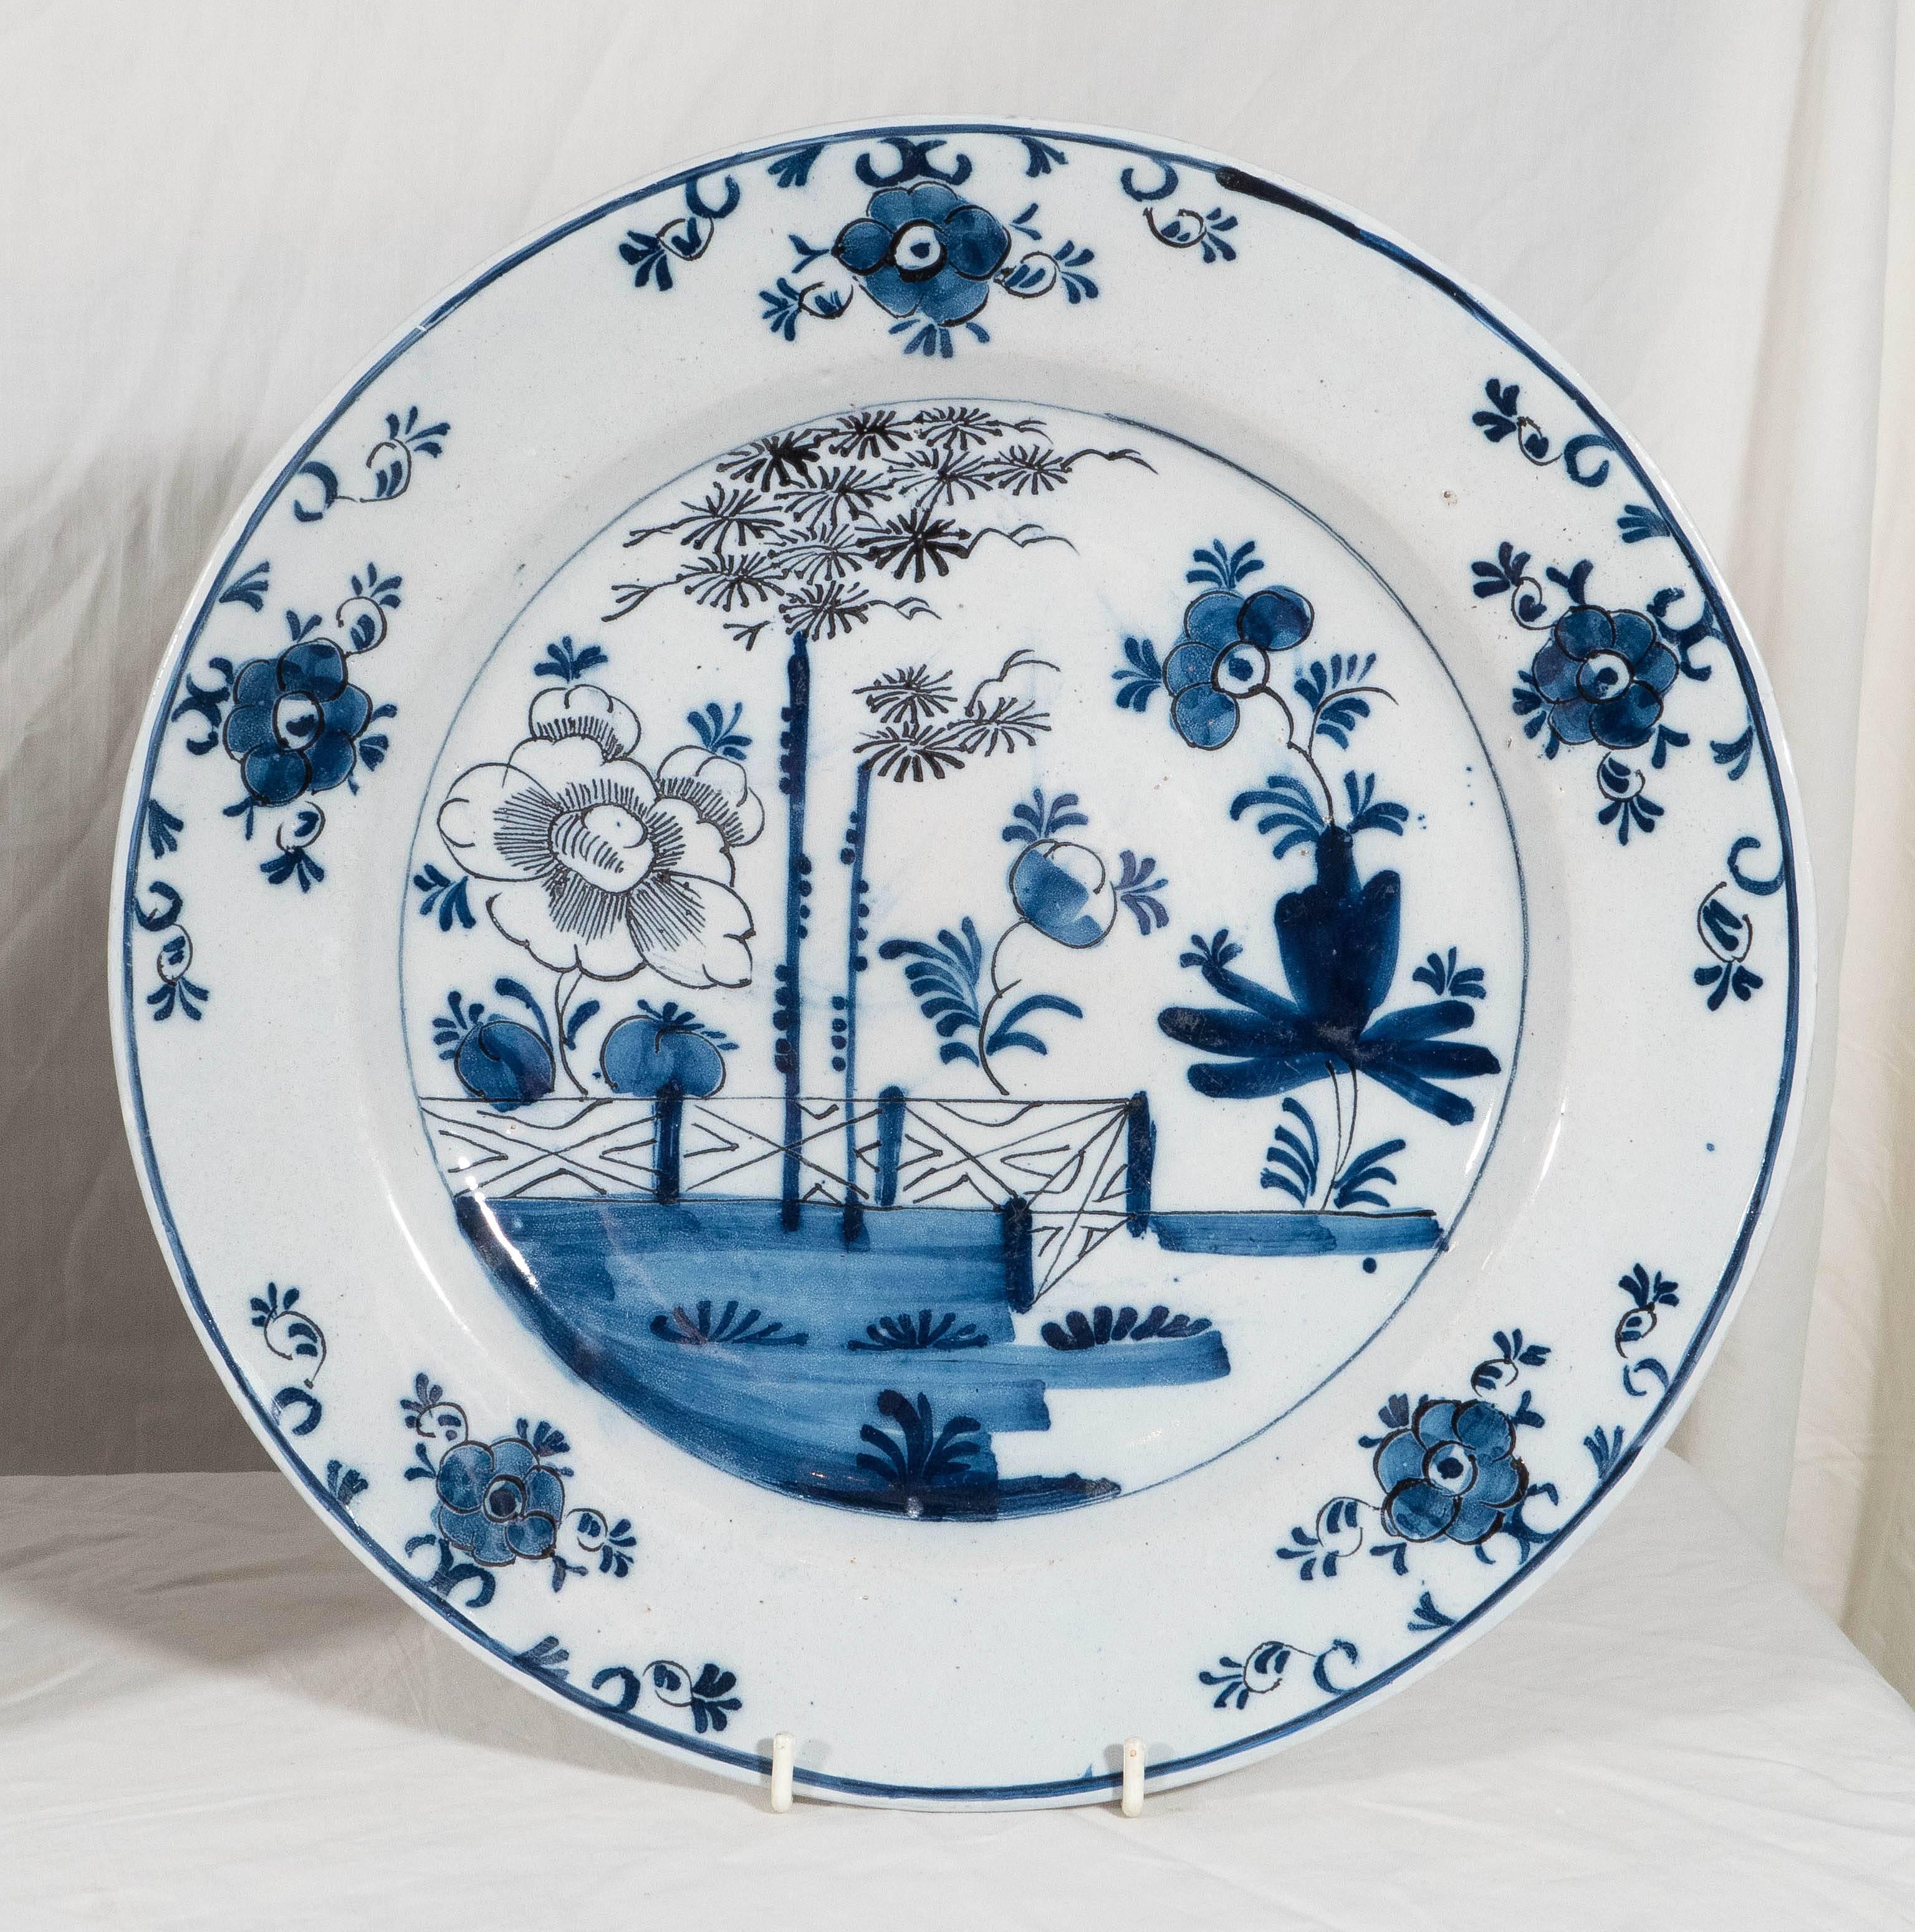 An 18th century pair of blue and white Delft chargers hand-painted with a chinoiserie garden scene. The scenes show an oversized peony, a garden fence and at the center two tall trees. The borders are painted with five flower heads and scrolling